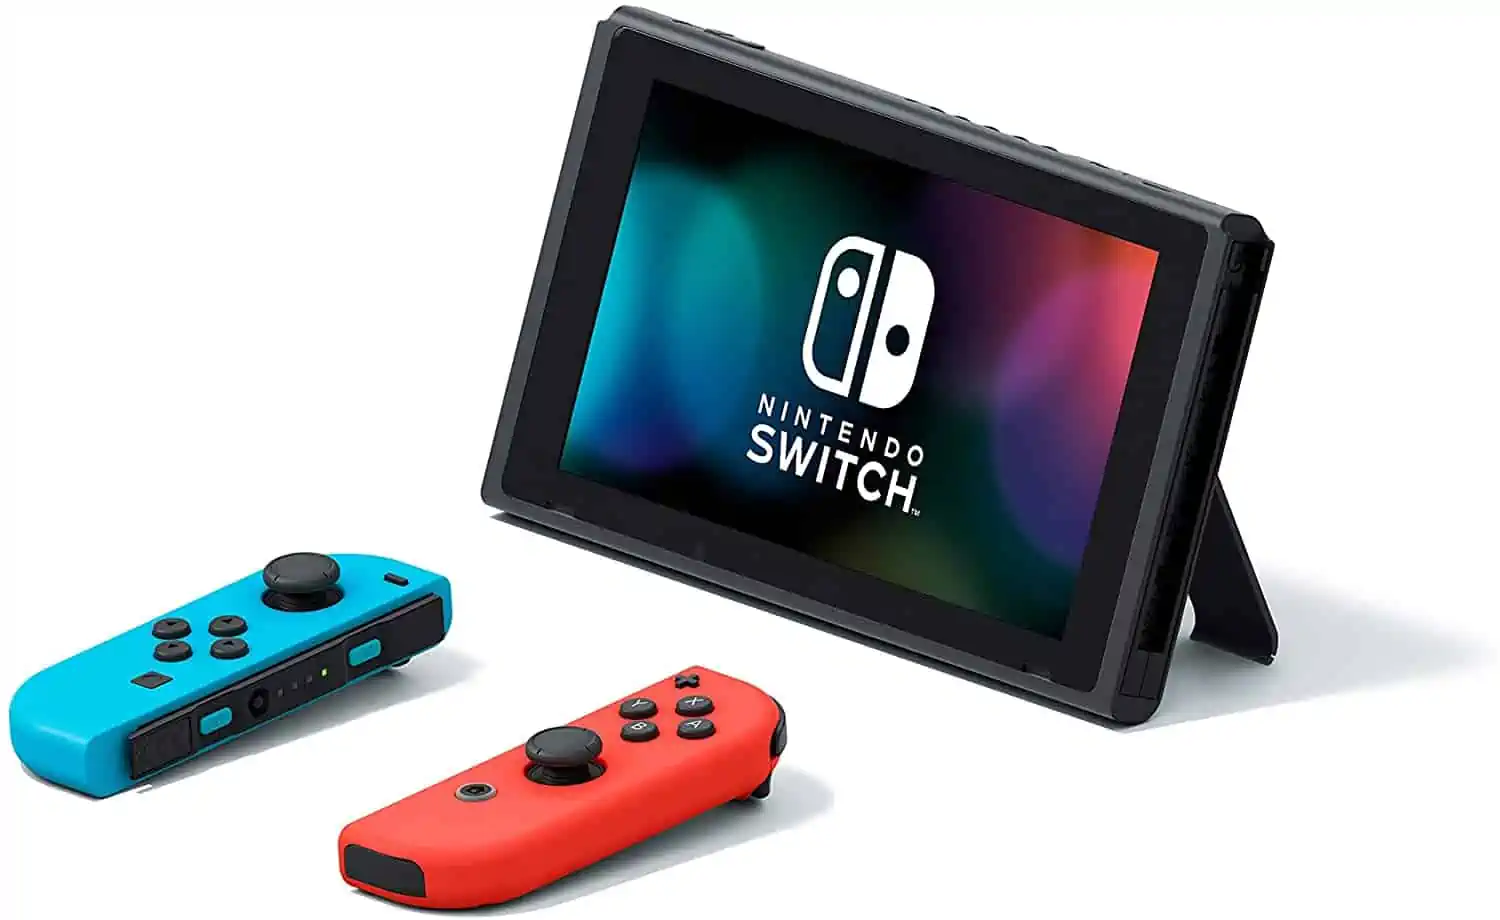 A Nintendo Switch with red and blue controllers.